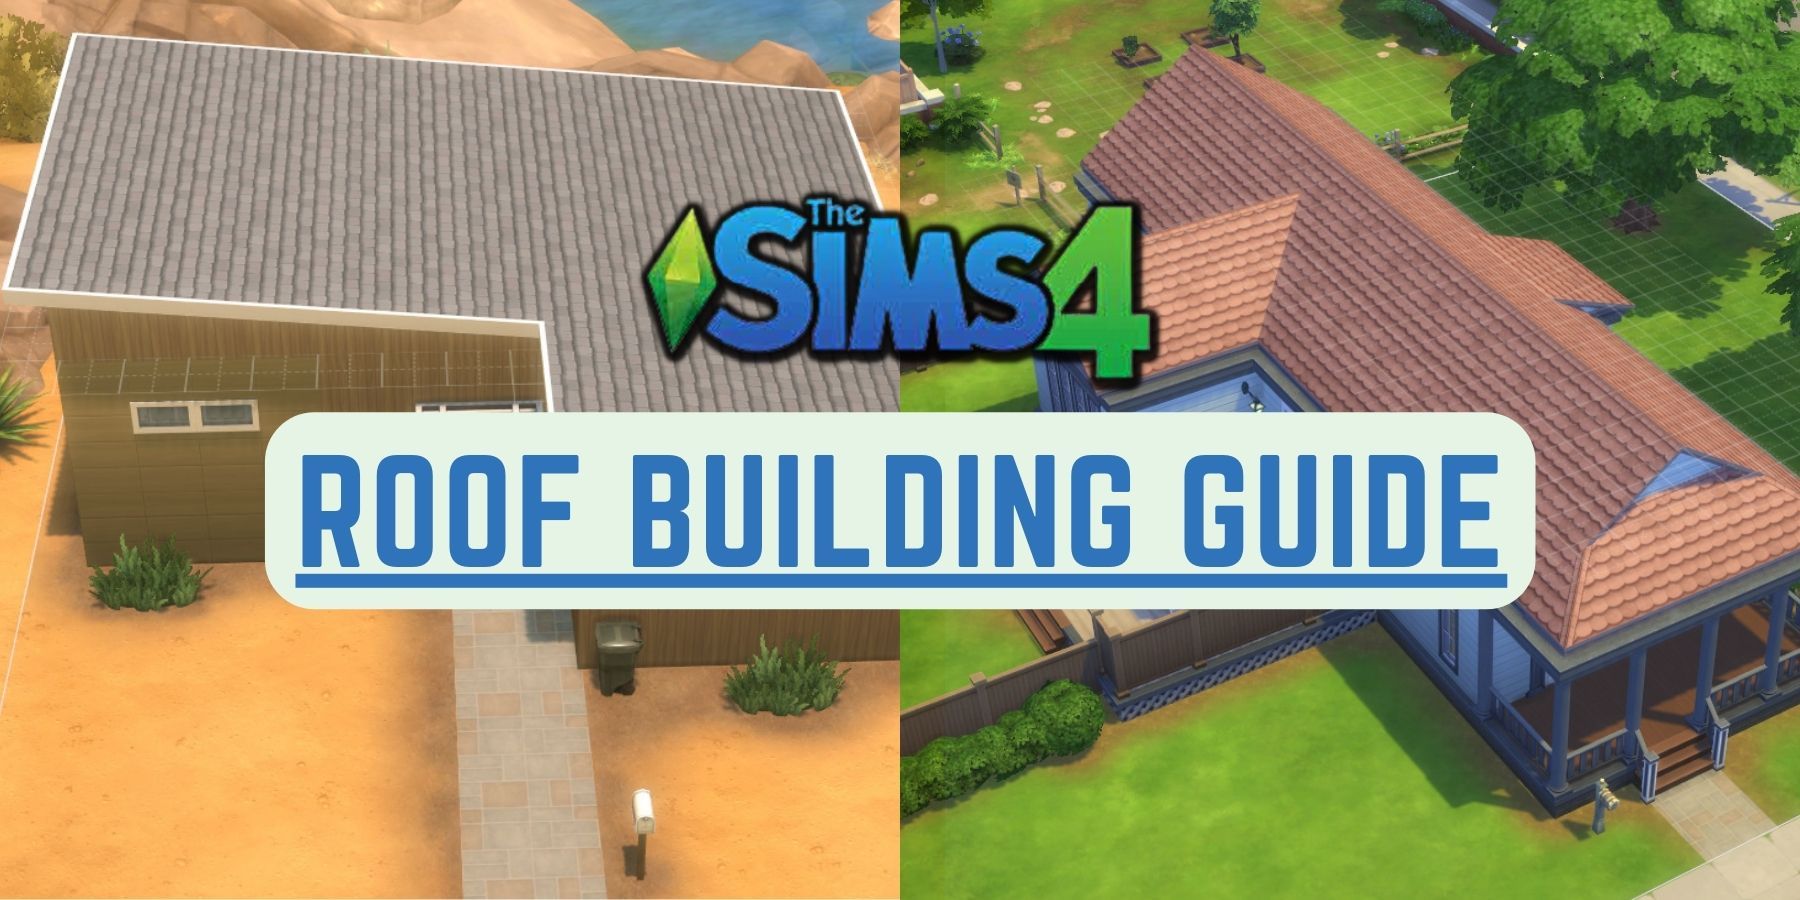 The Sims 4 Roof Building Guide